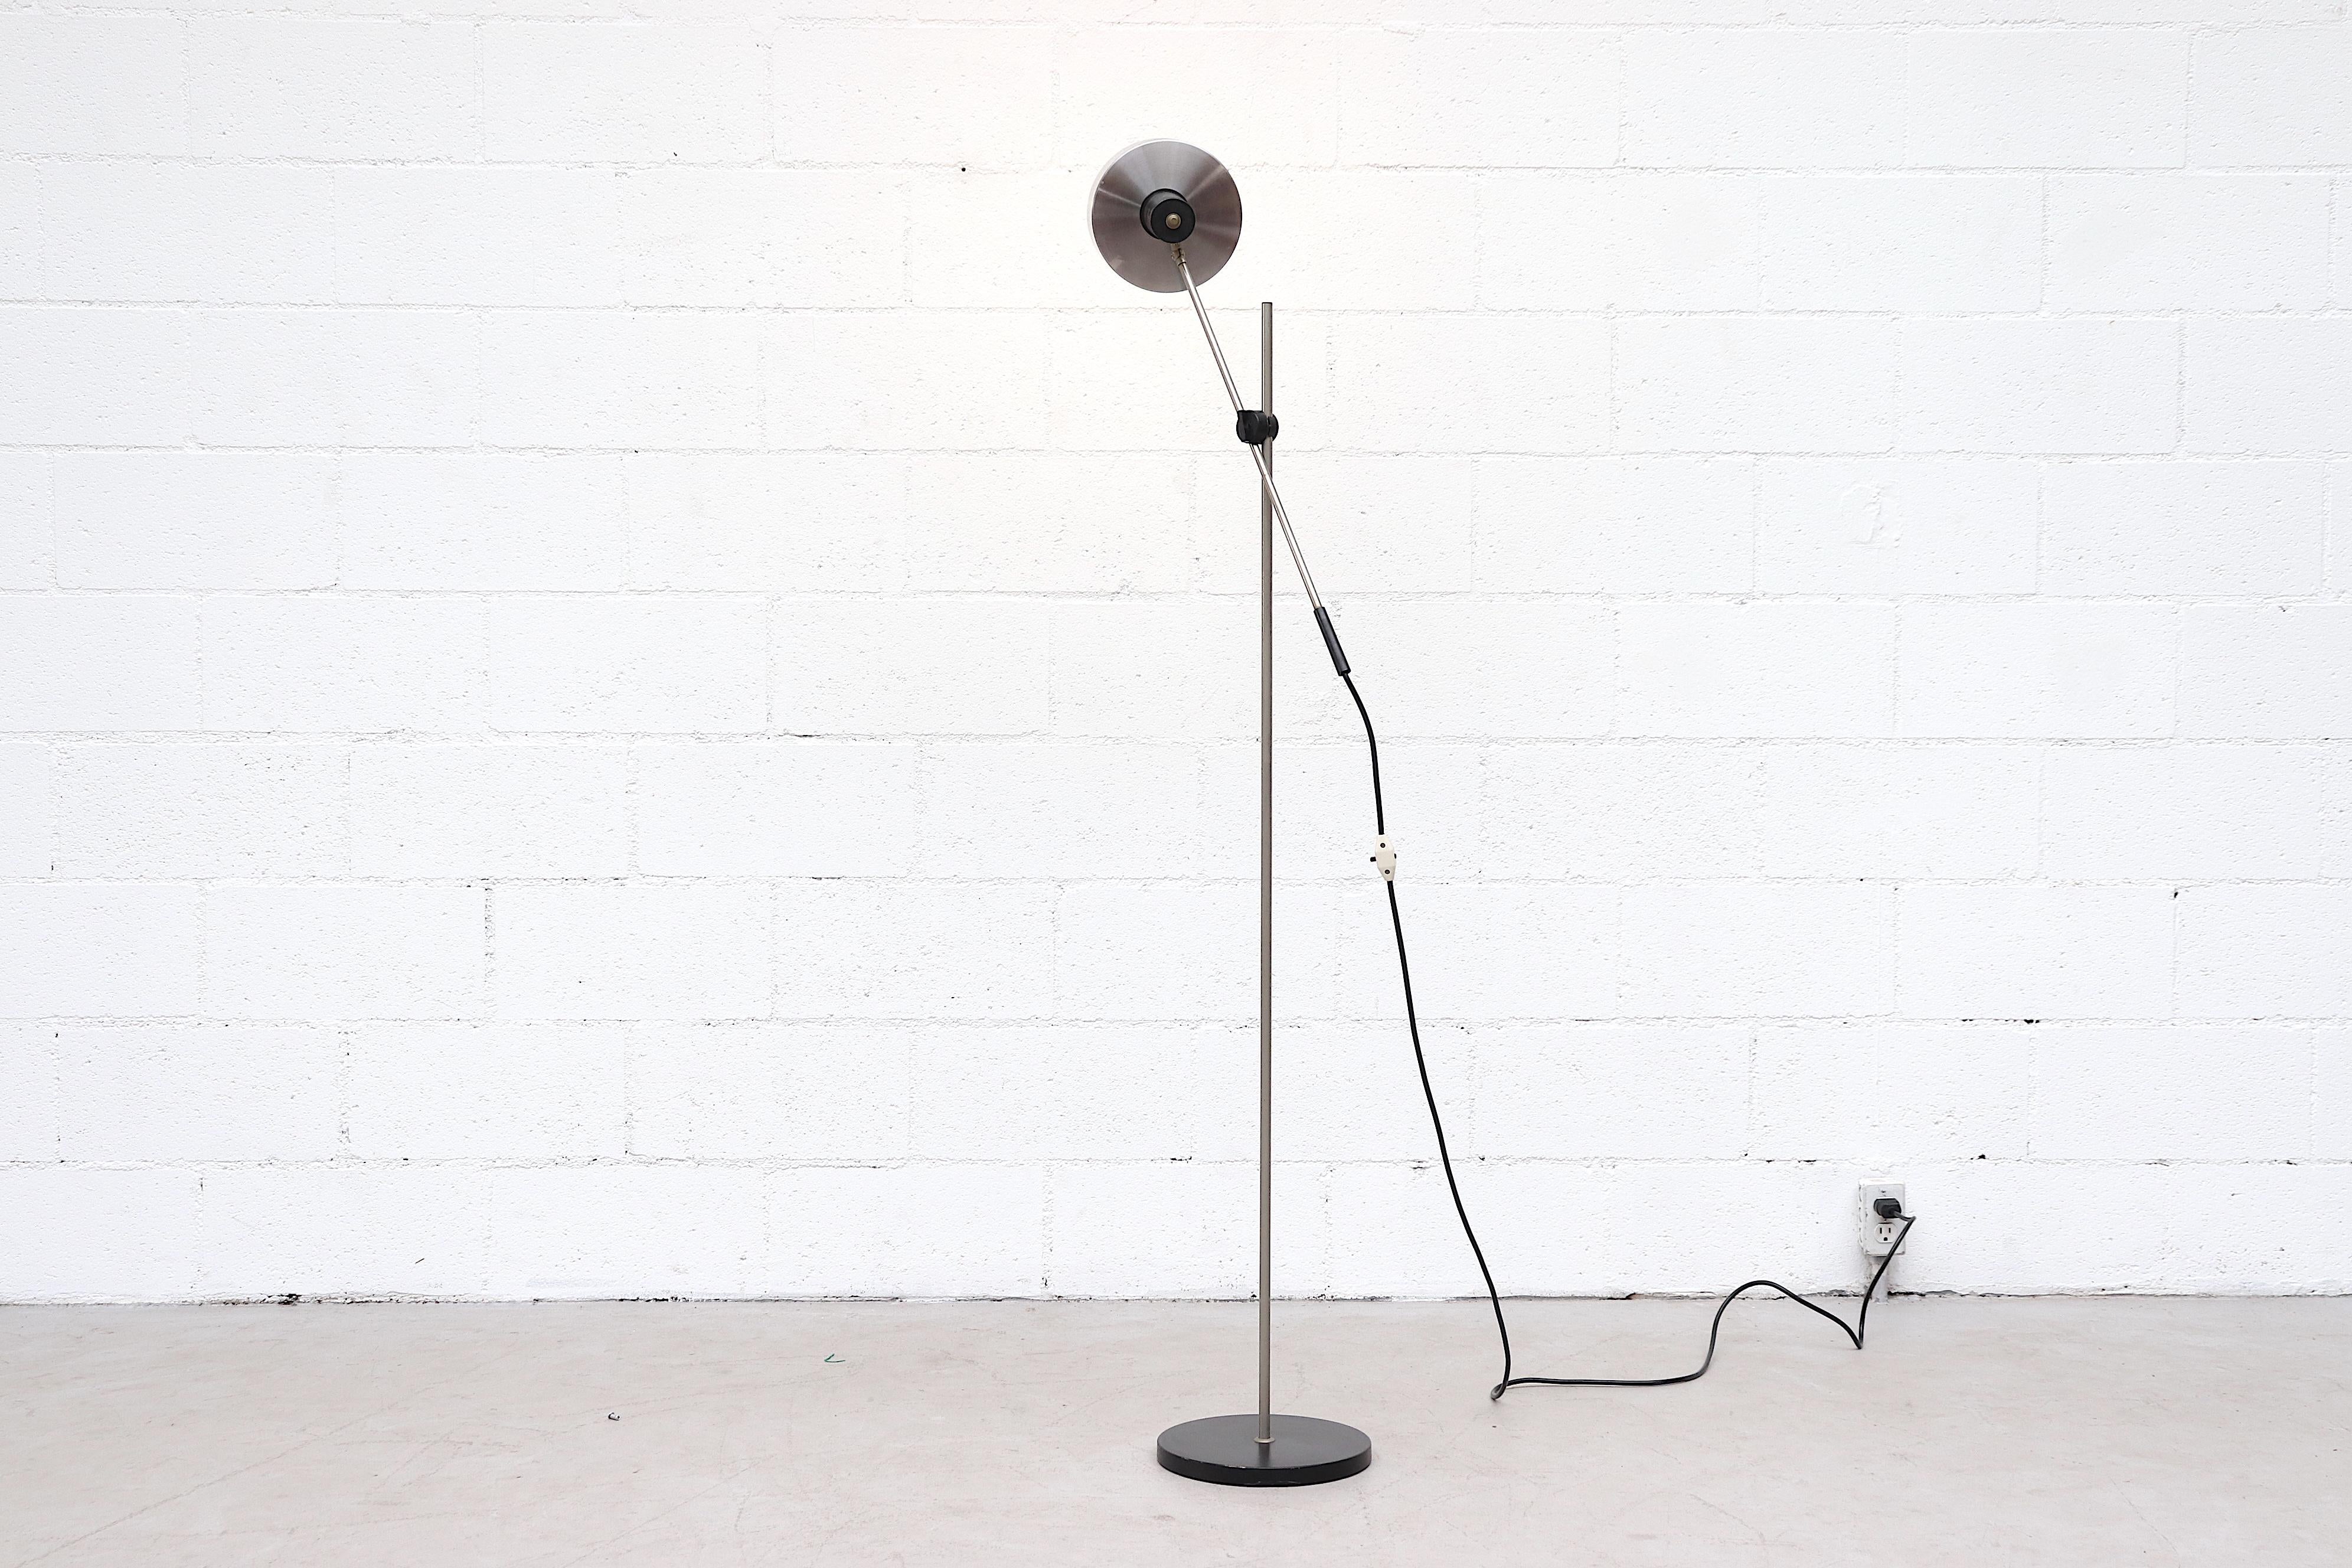 Midcentury cantilevered floor lamp with black enameled metal base and black accents. Adjustable arm, height, and shade for a variety of light configurations. In original condition with visible wear consistent with its age.